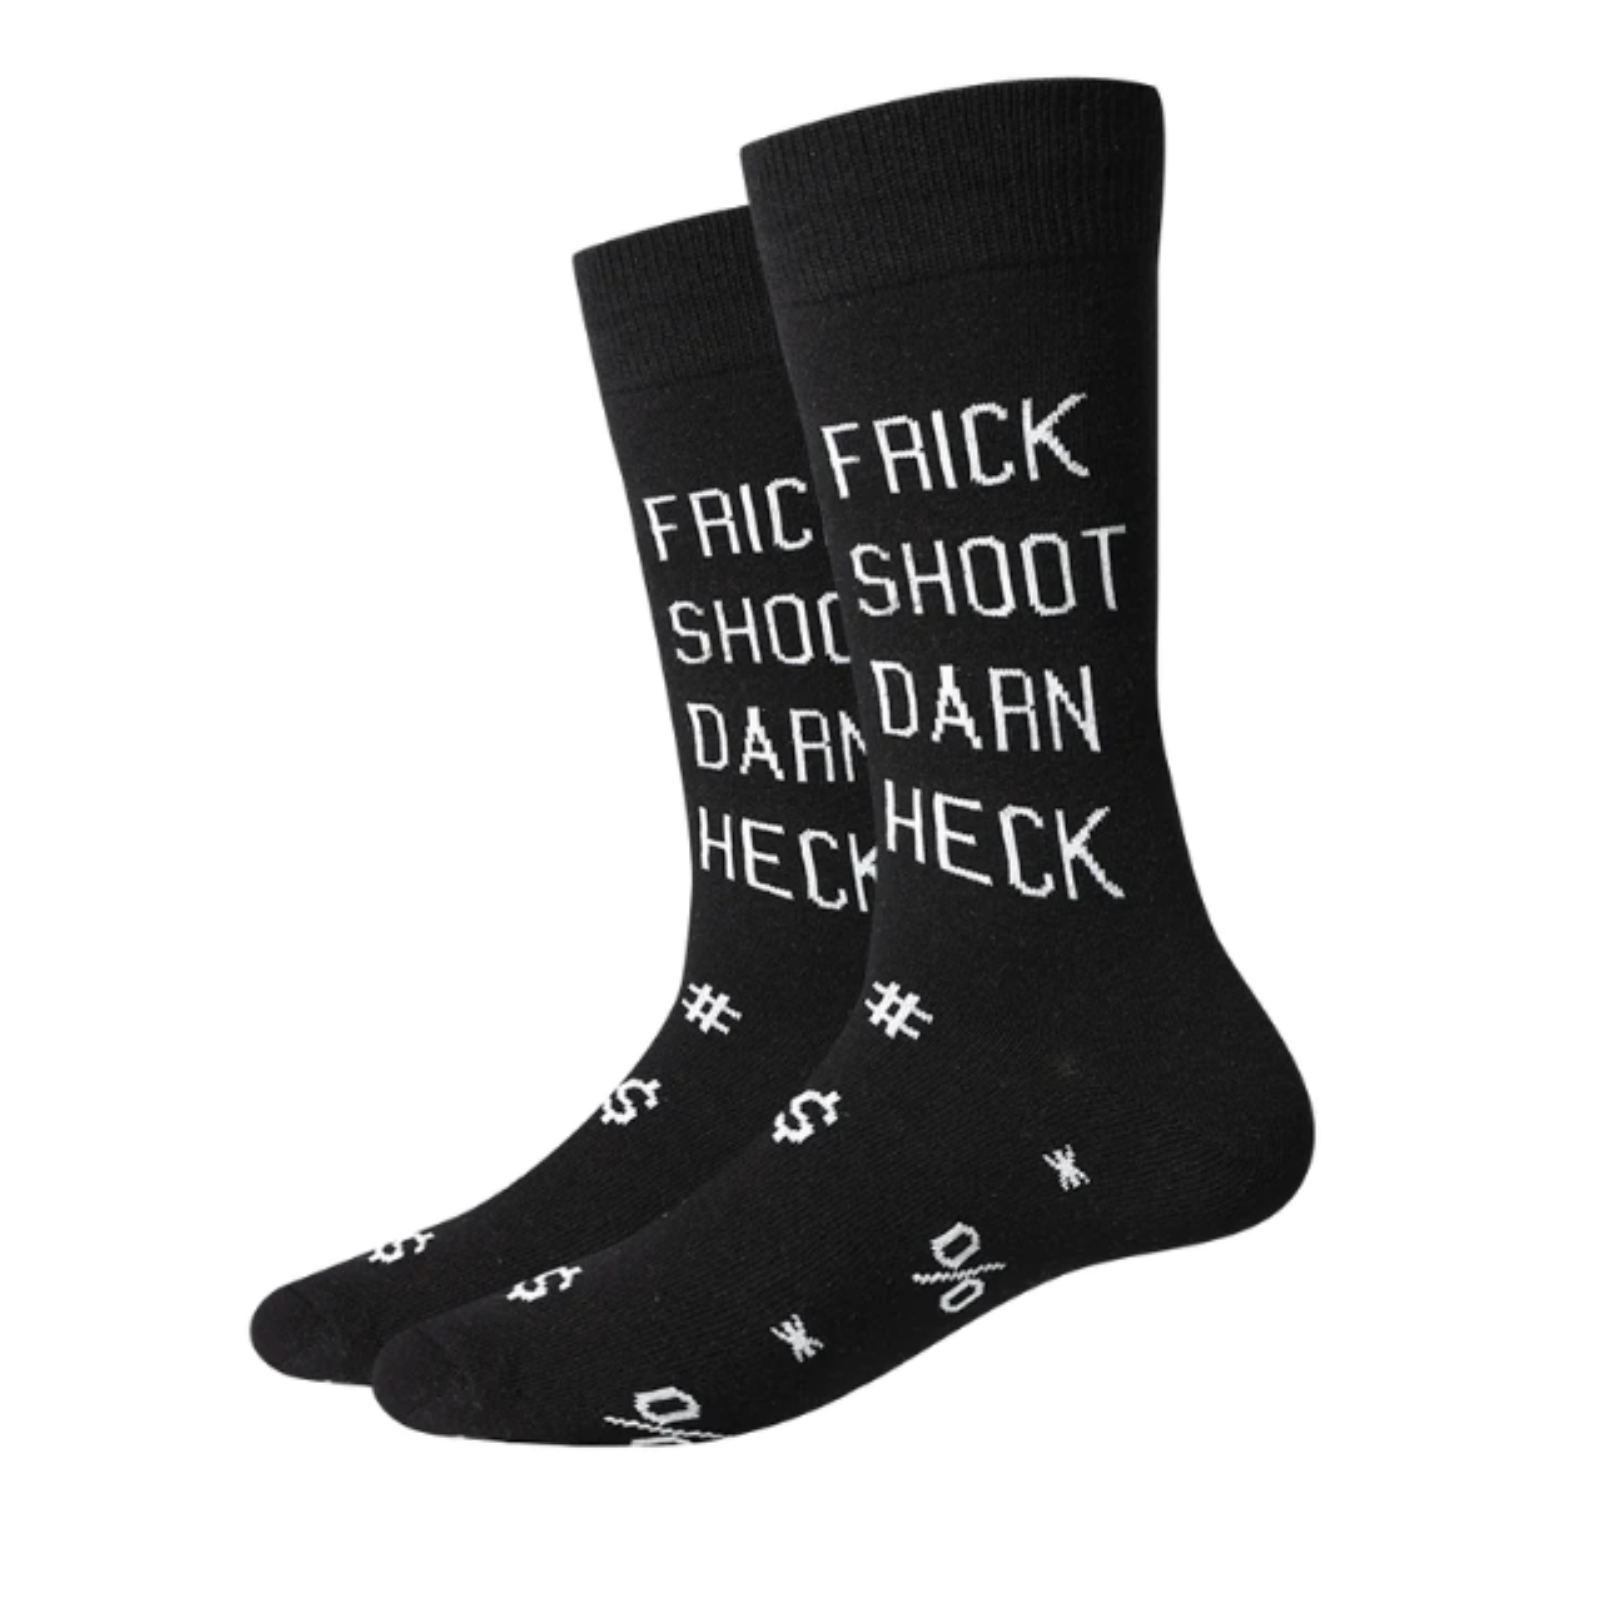 Sock Harbor Frick Shoot men's sock featuring black sock with words "Frick, Shoot, Darn, Heck" and punctuation marks in white font on display feet